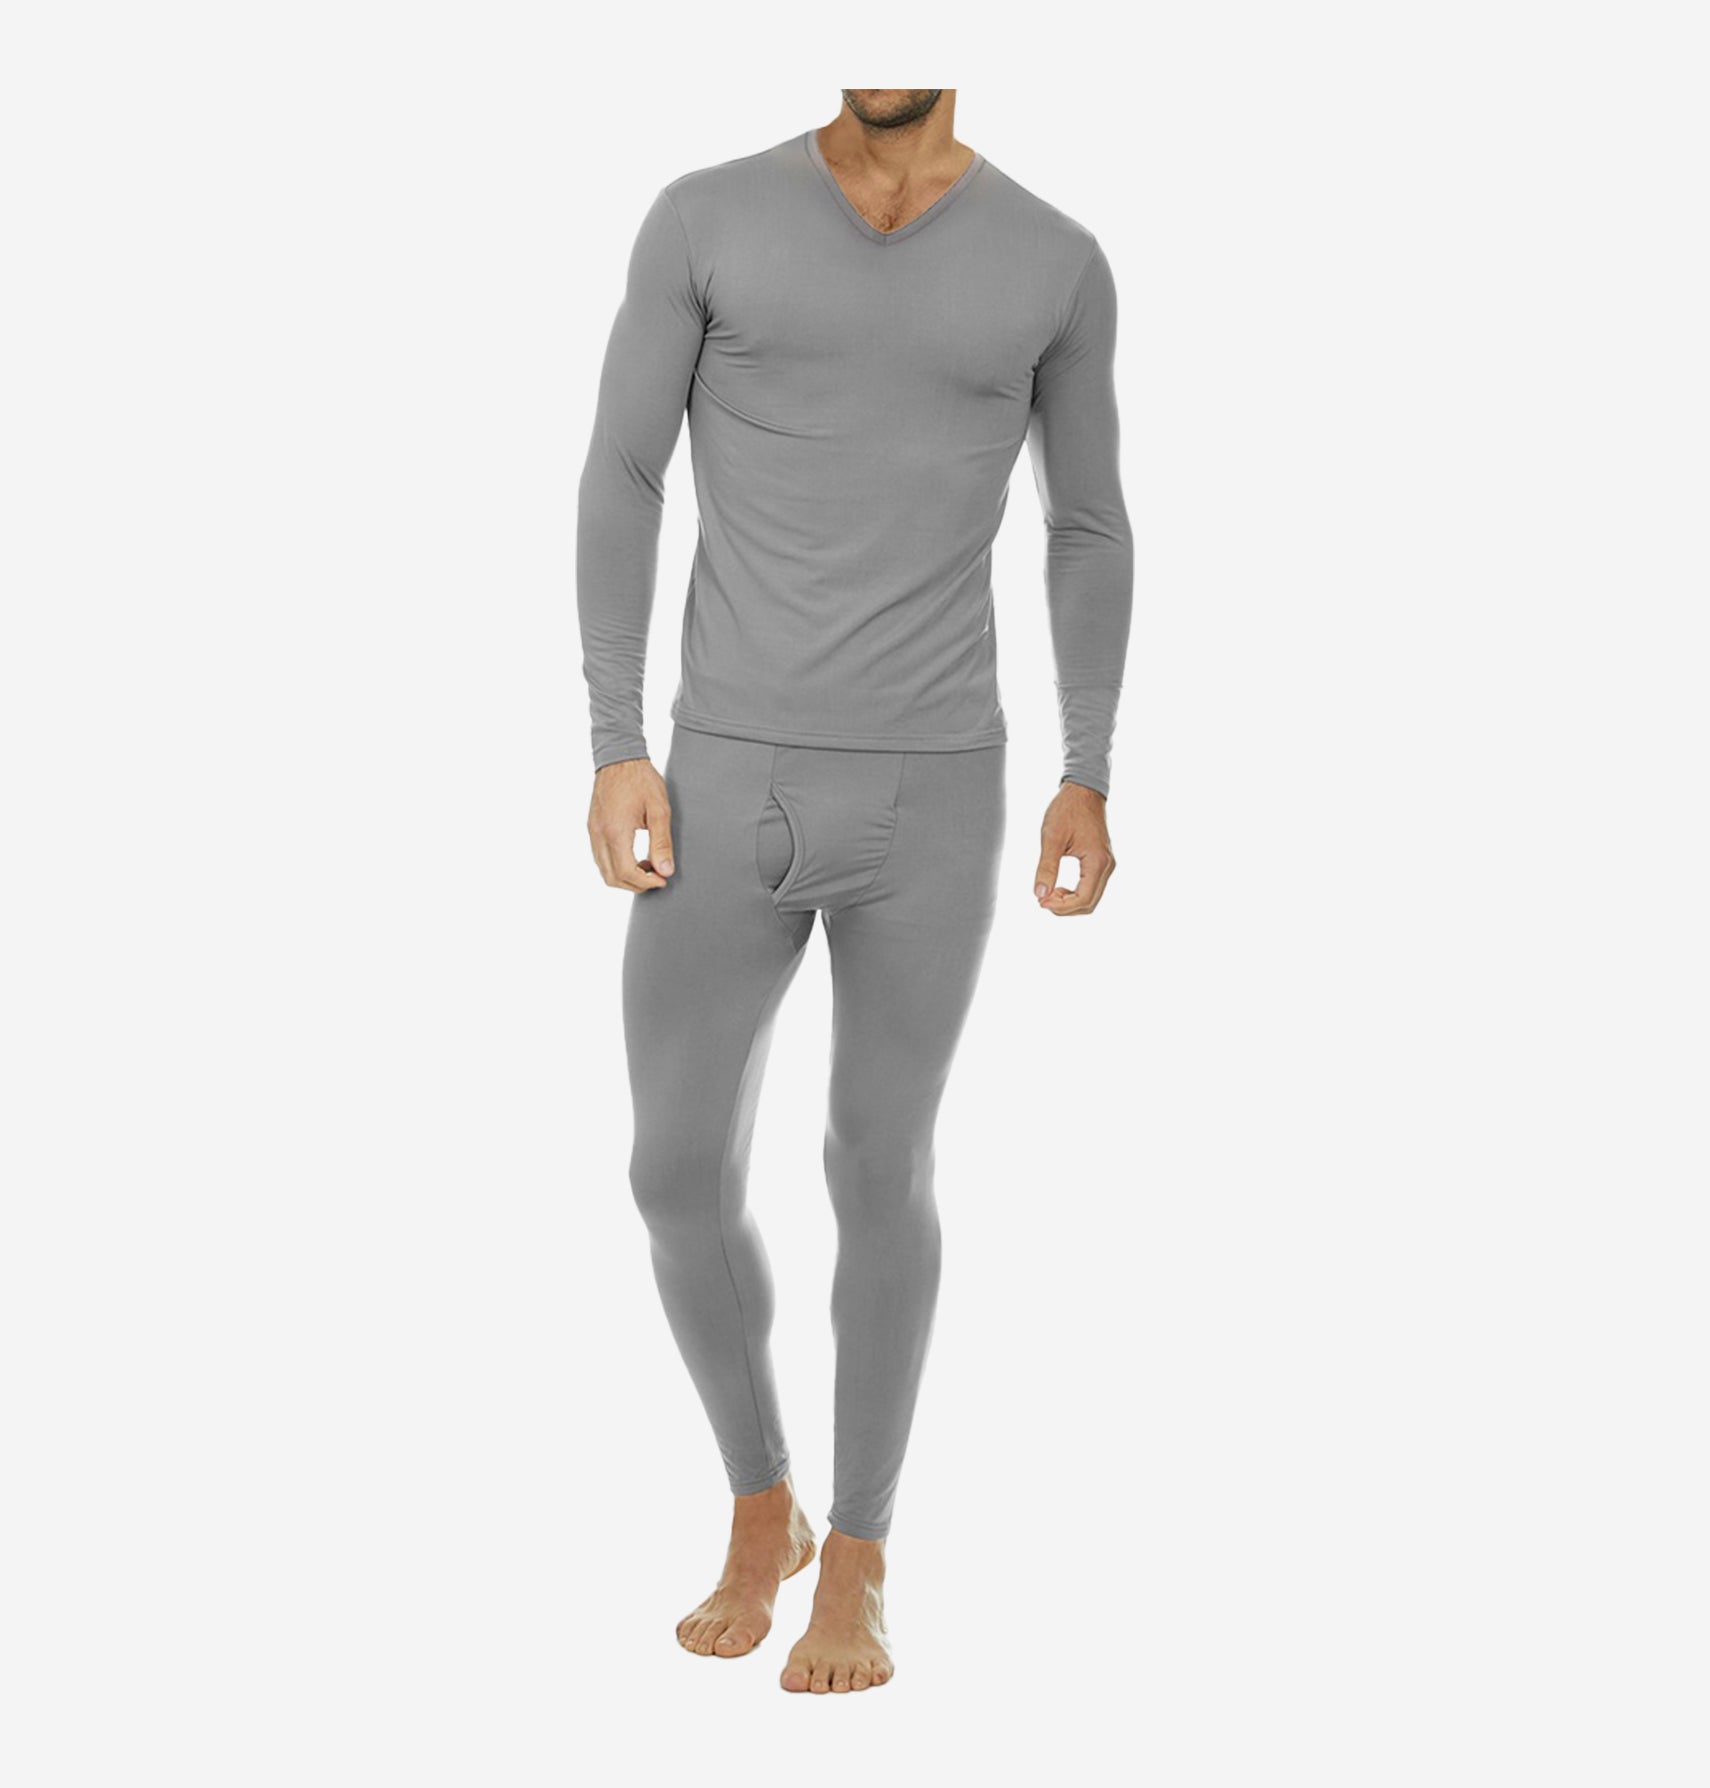 Men039s Thermal Underwear AOELEMENT Vneck Coldproof Suit Plus Velvet  Tightfitting Thin Autumn Clothes Long Trousers Y7e7 From L1px, $44.68